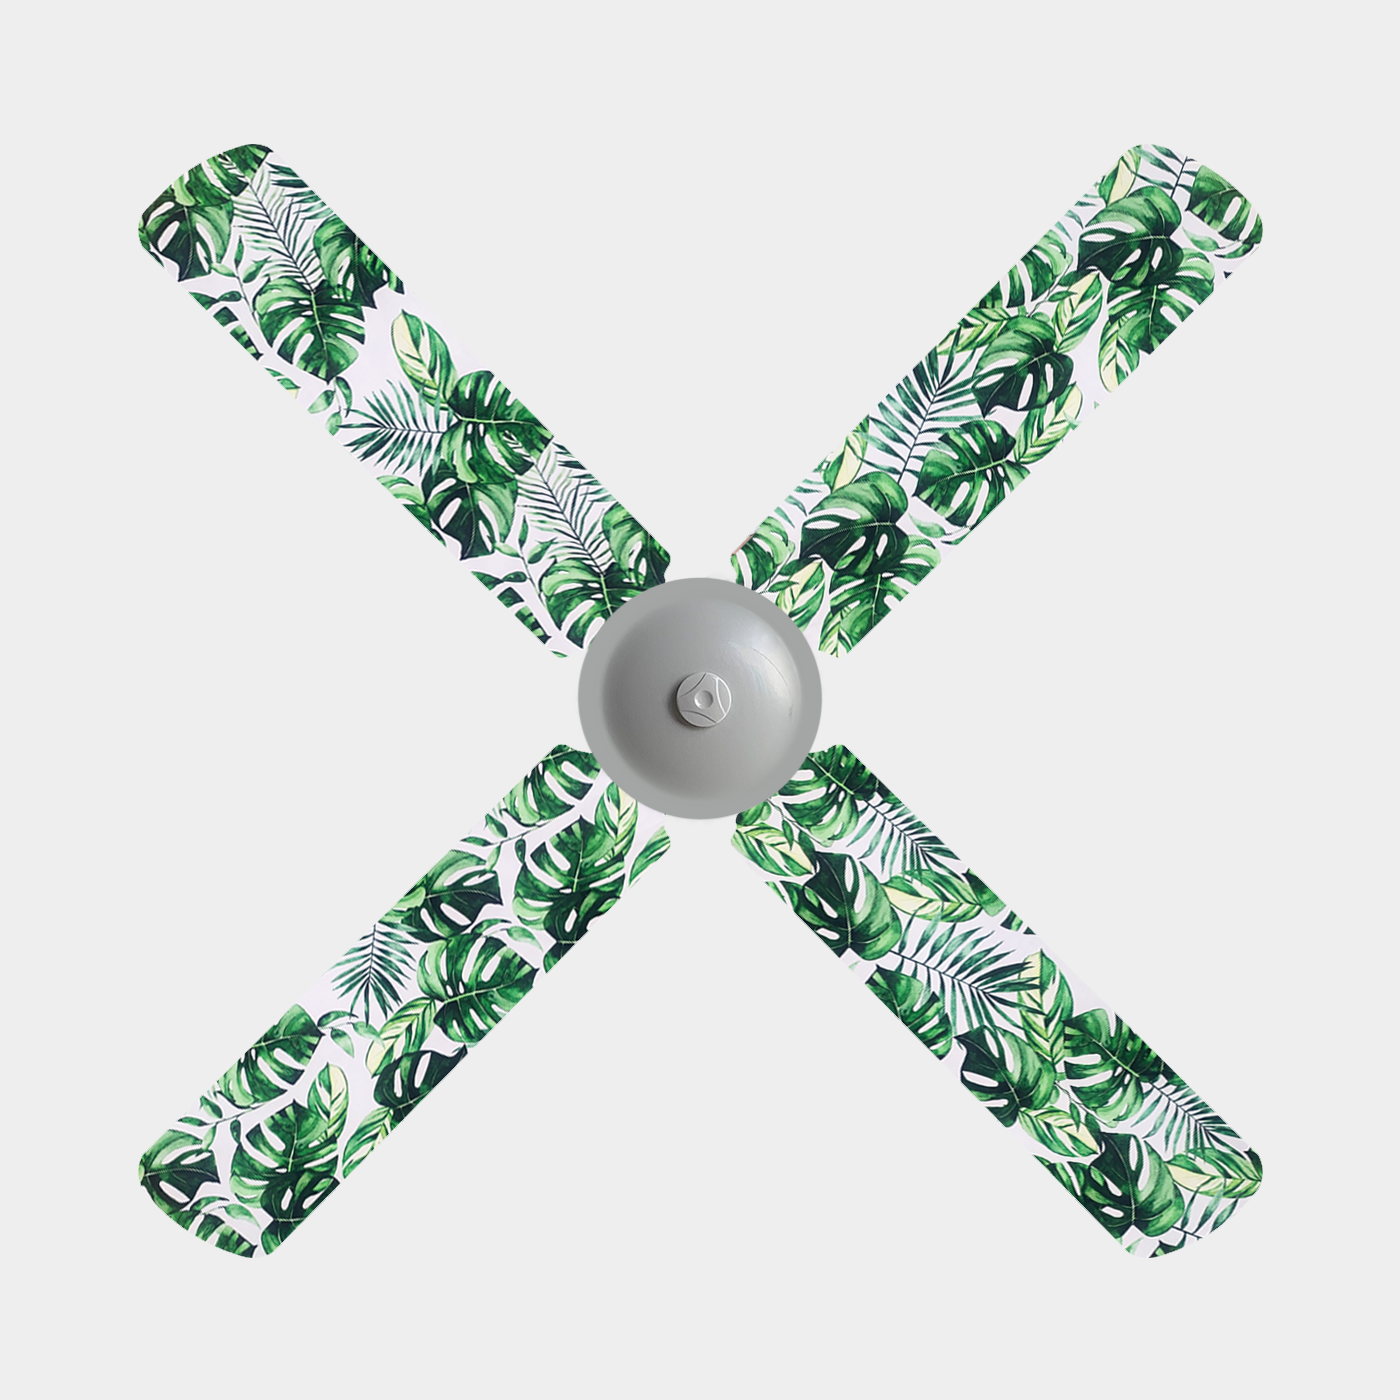 Green monstera leaves and green fern print fanblade covers on a white background